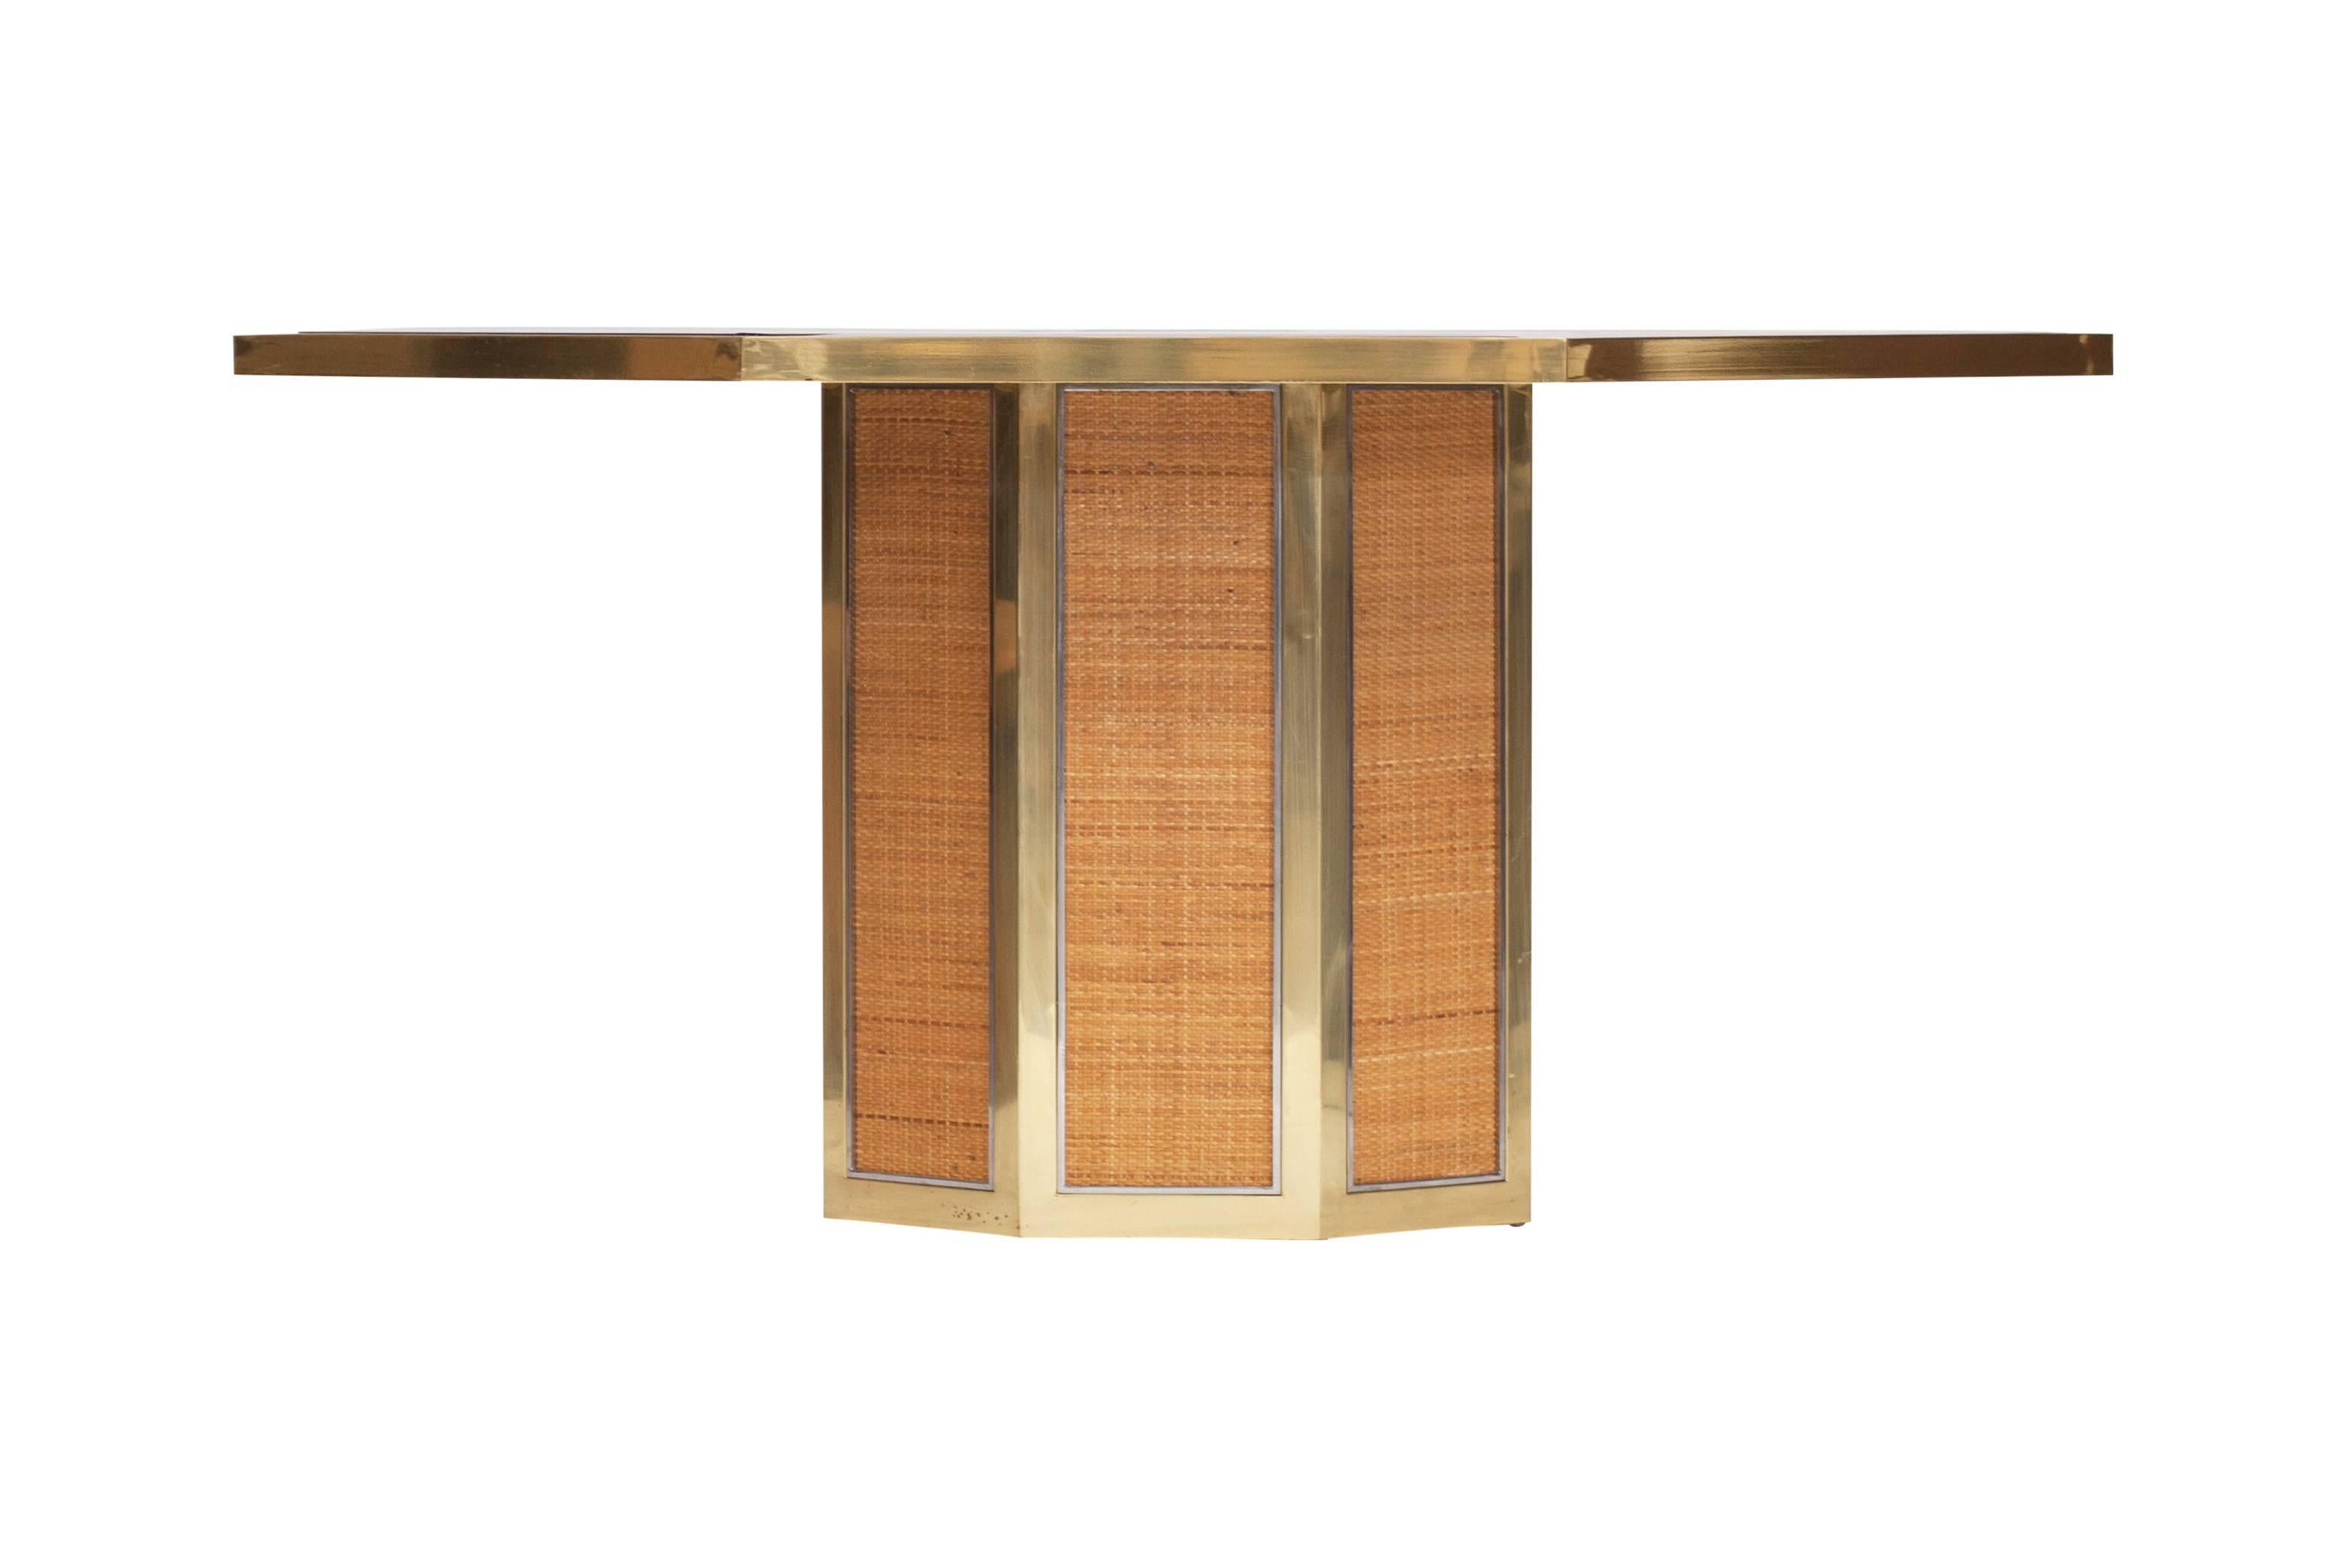 Chique octagonal dining table by Romeo Rega.

1970s, Italy.

Brass. Smoked glass. wicker

This makes an extraordinary set with the matching dining chairs in our other listing.

Measures: Ø 163 cm, H 73 cm.
 